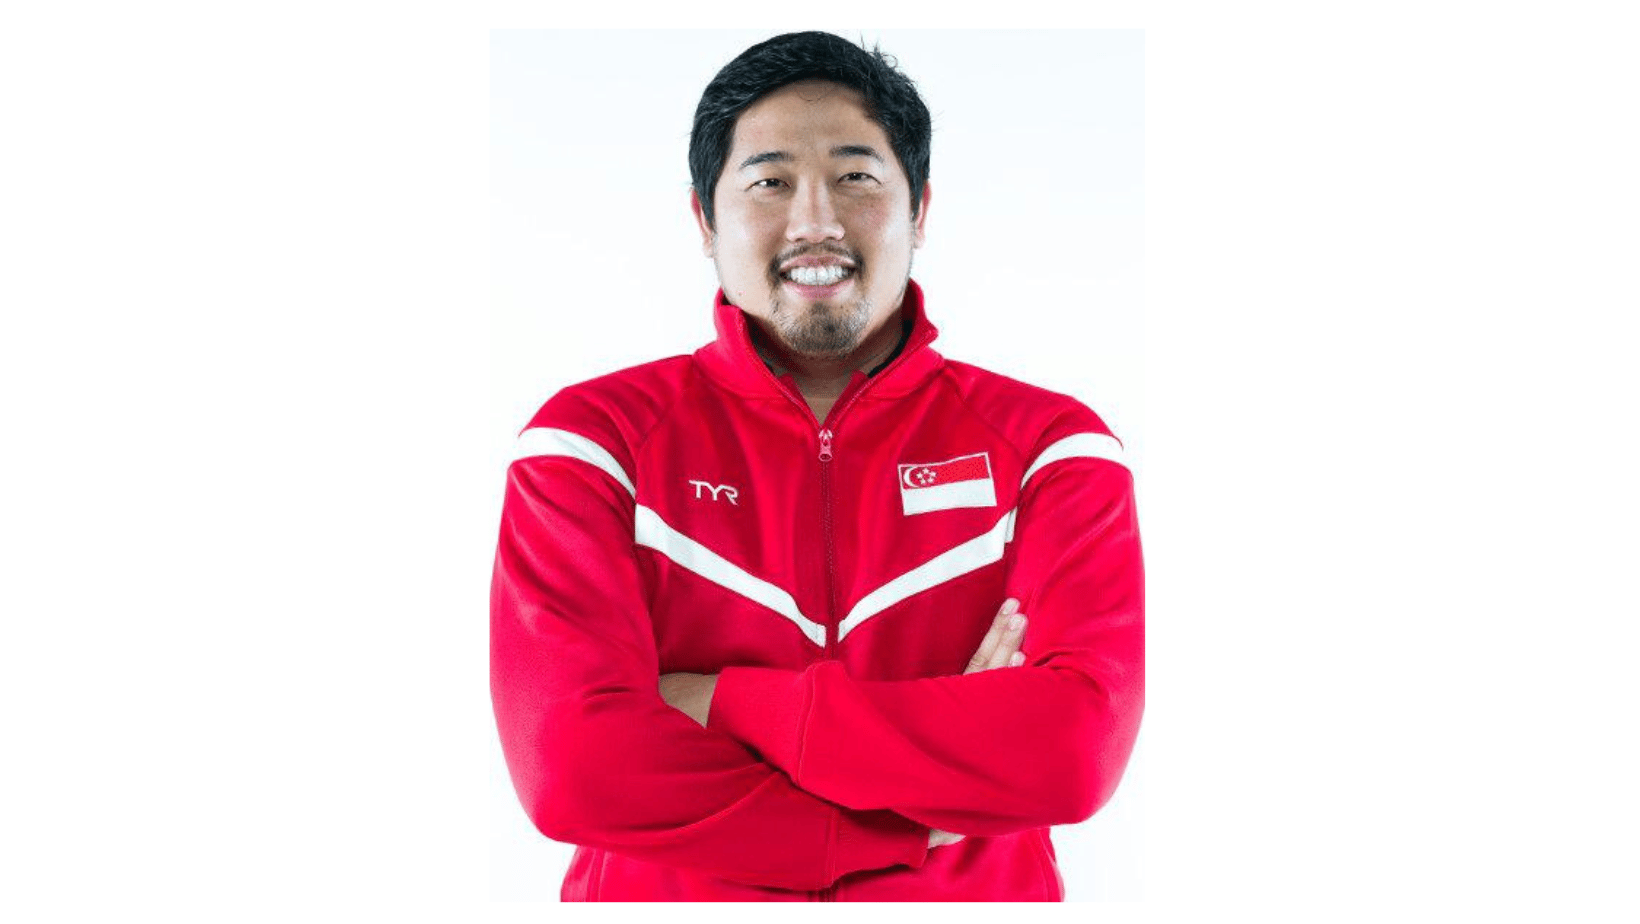 “Coaching is like teaching. You don’t call it just a career. It’s a vocation that’s more than just churning out numbers. It’s a place where you journey with others, where you influence people, change mindsets, shape careers,” said Gary Tan, head coach of Singapore Swimming Association (SSA). All photos courtesy of Gary Tan.